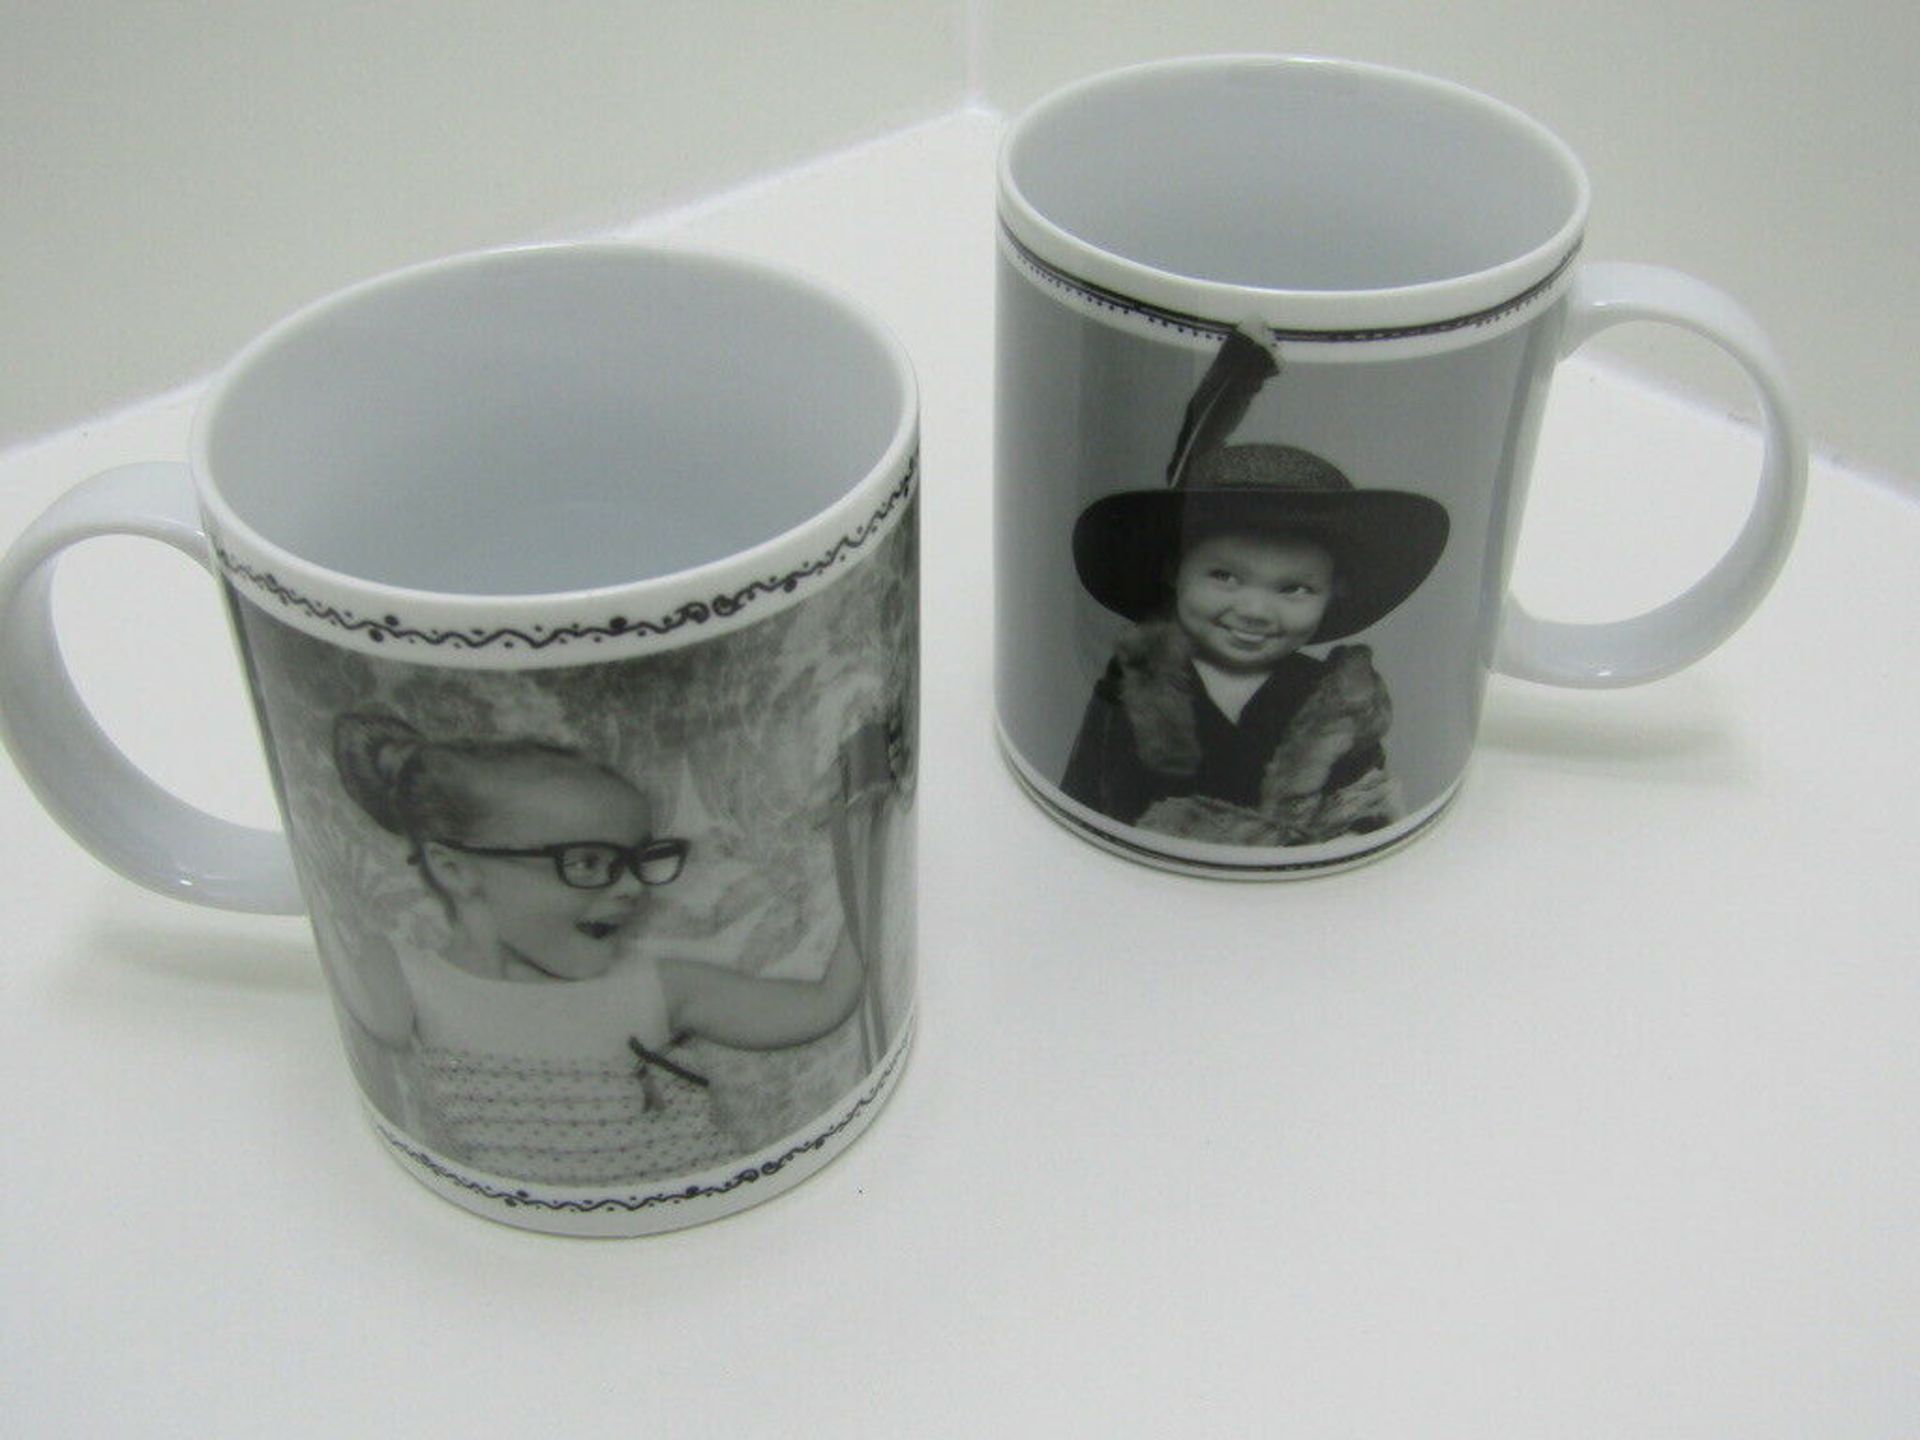 20 x Novelty Mugs. Gift Boxed. Coffe Mugs. Large 11oz Volume. no vat on hammer.You will get 20 - Image 7 of 7